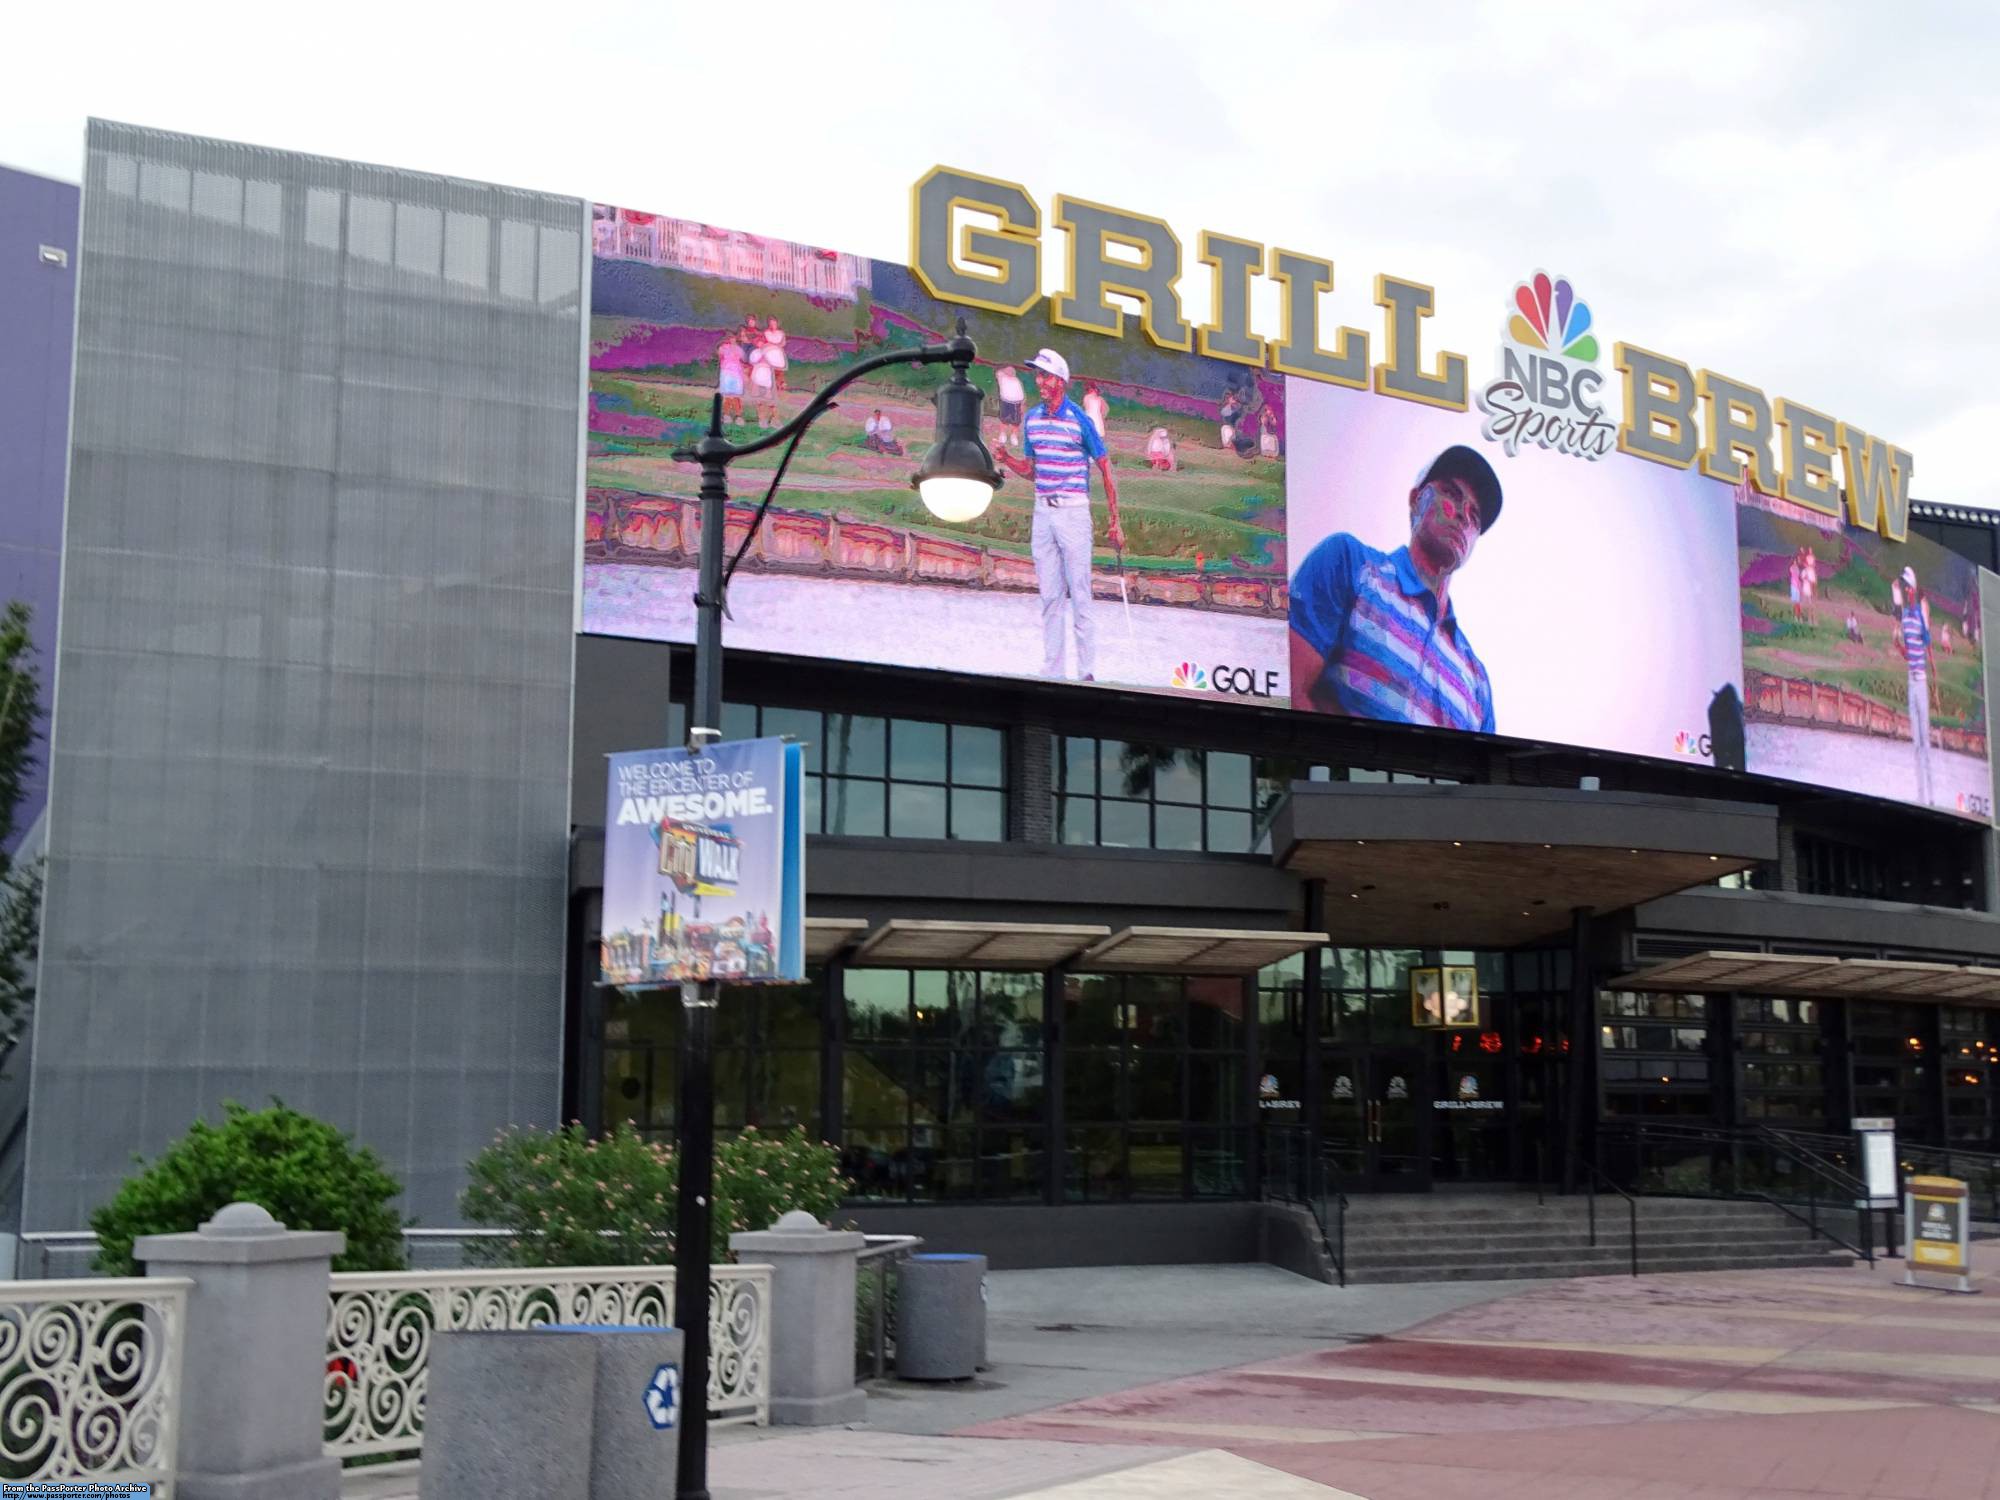 NBC Sports Grill and Brew